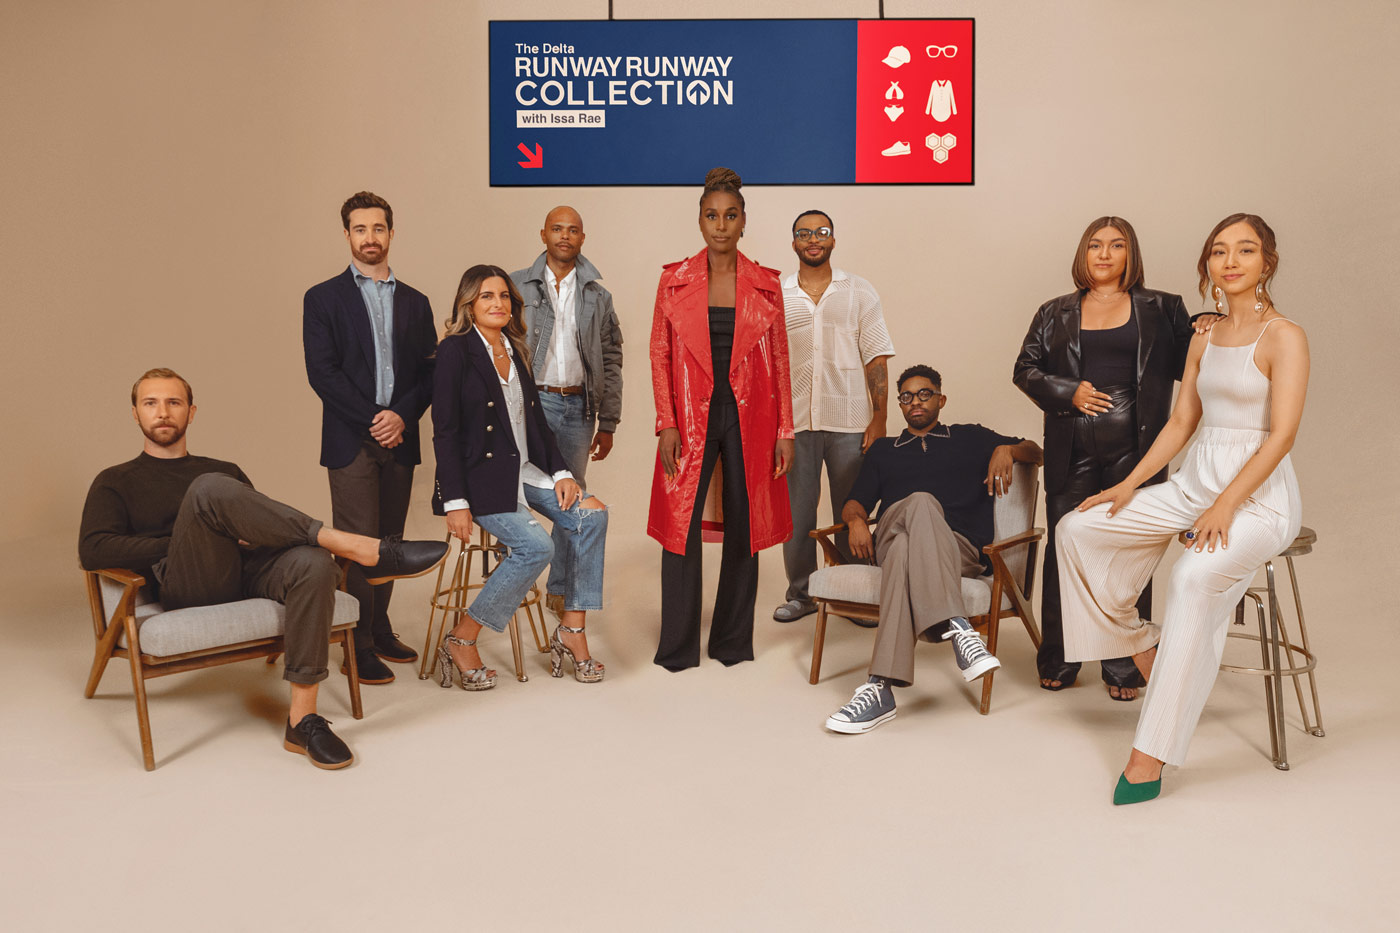 Issa Rae and Delta Team Up to Launch Travel-Inspired Collection at L.A. Fashion Week